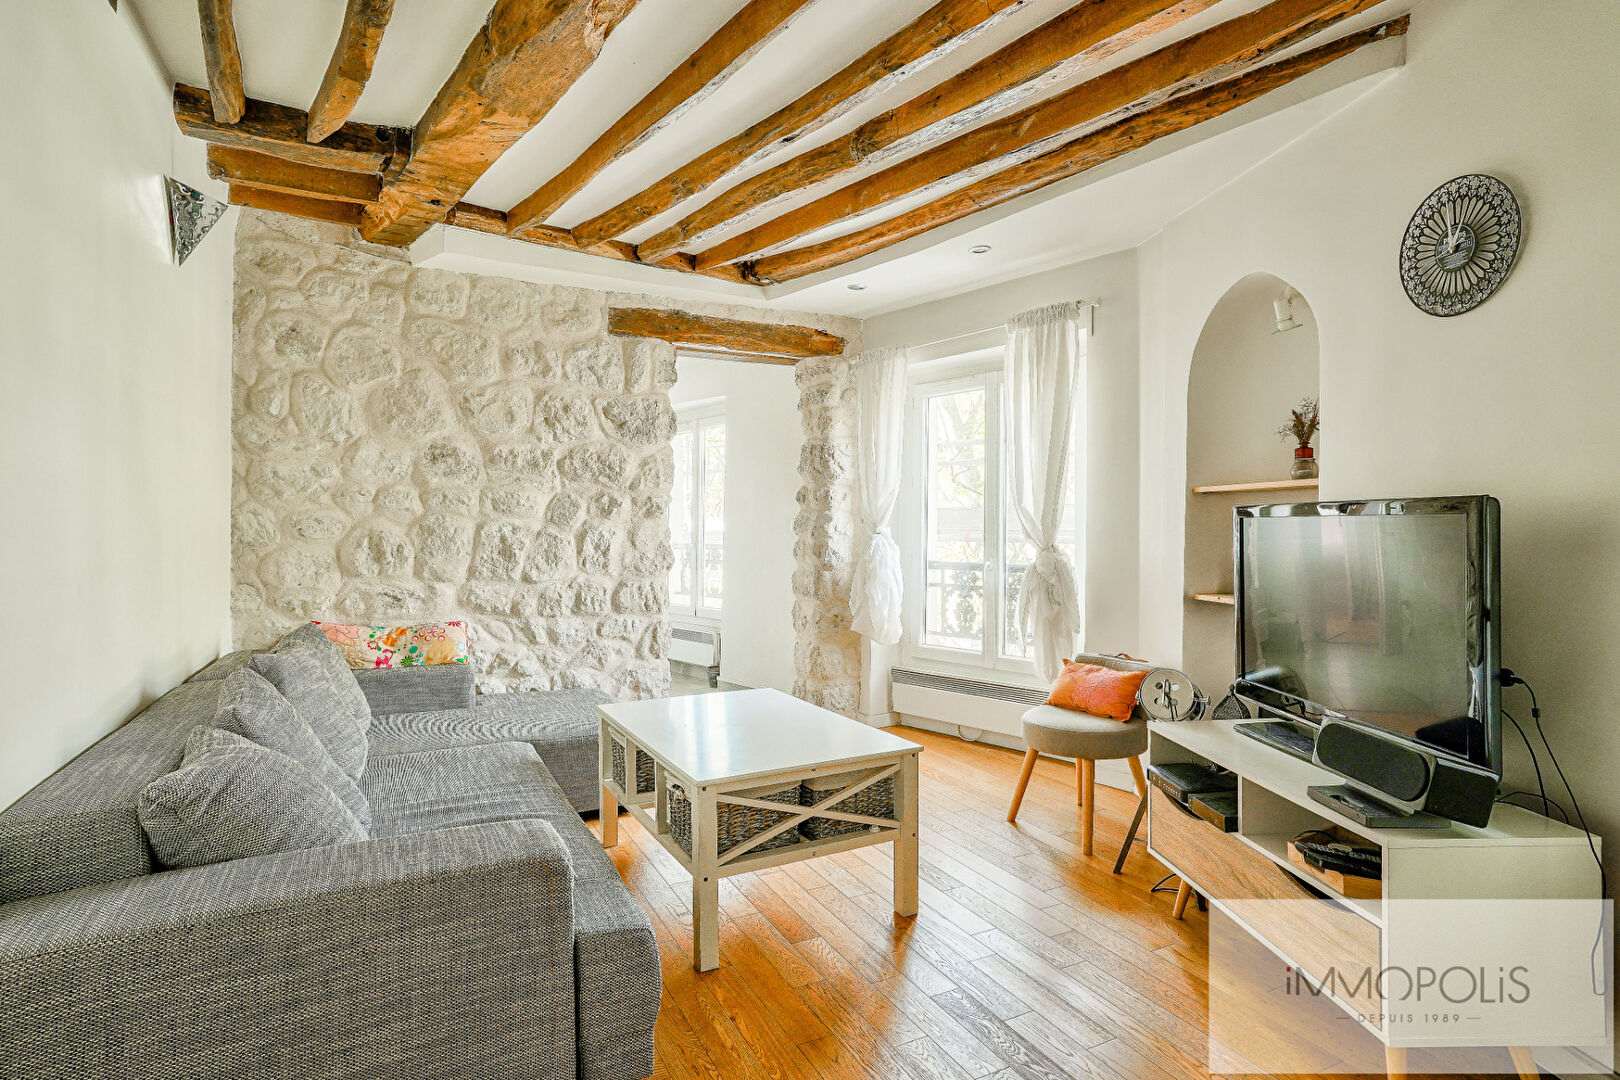 Apartment two rooms of 35m² full of charm 1